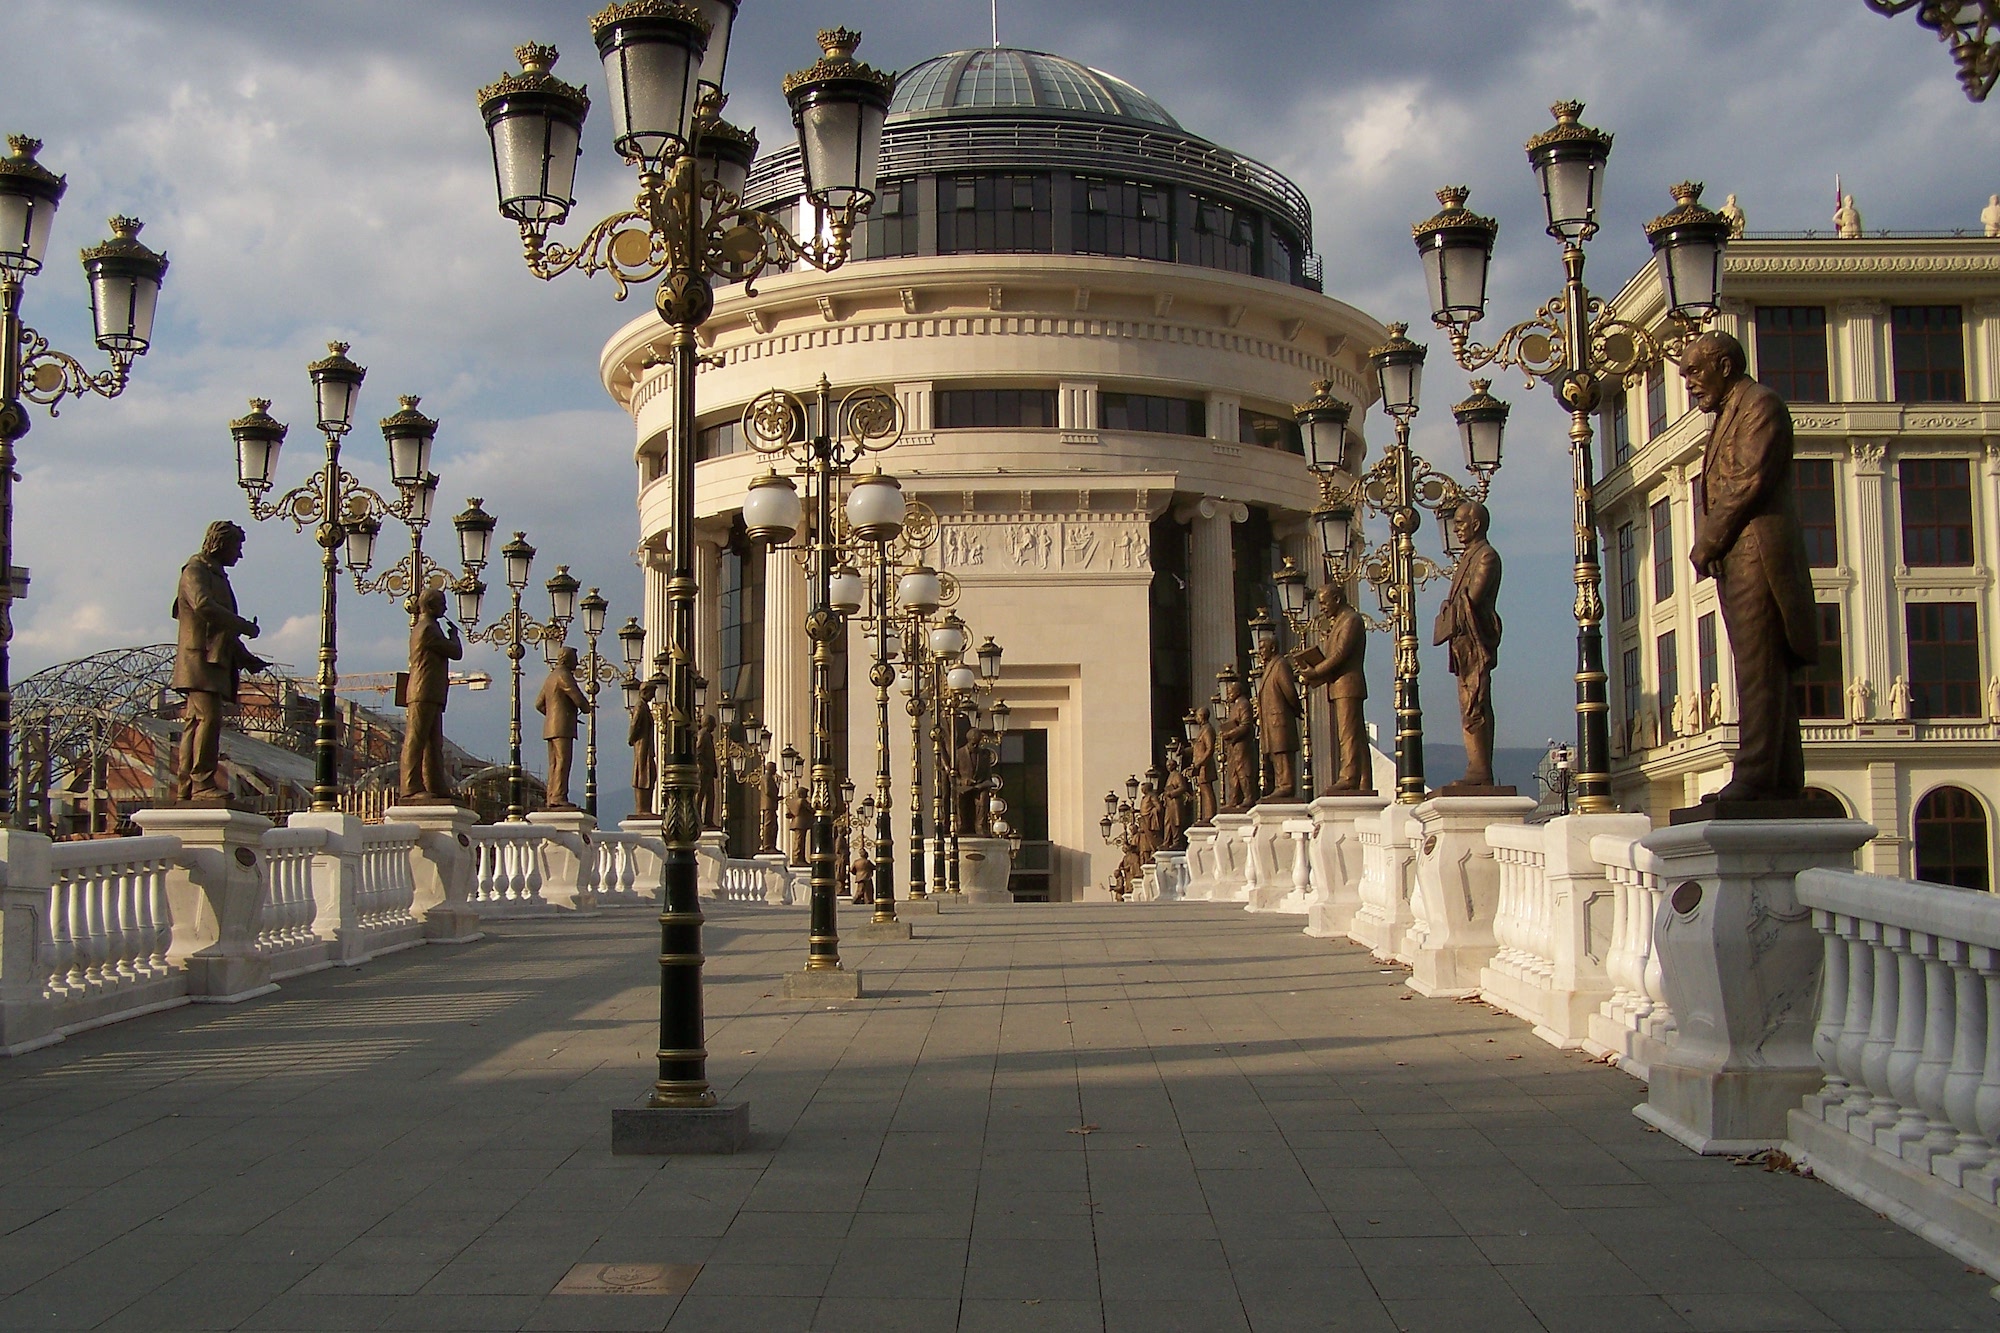 The Bridge of Arts leading to the Ministry of Foreign Affairs. Image: Zorica under a CC licence